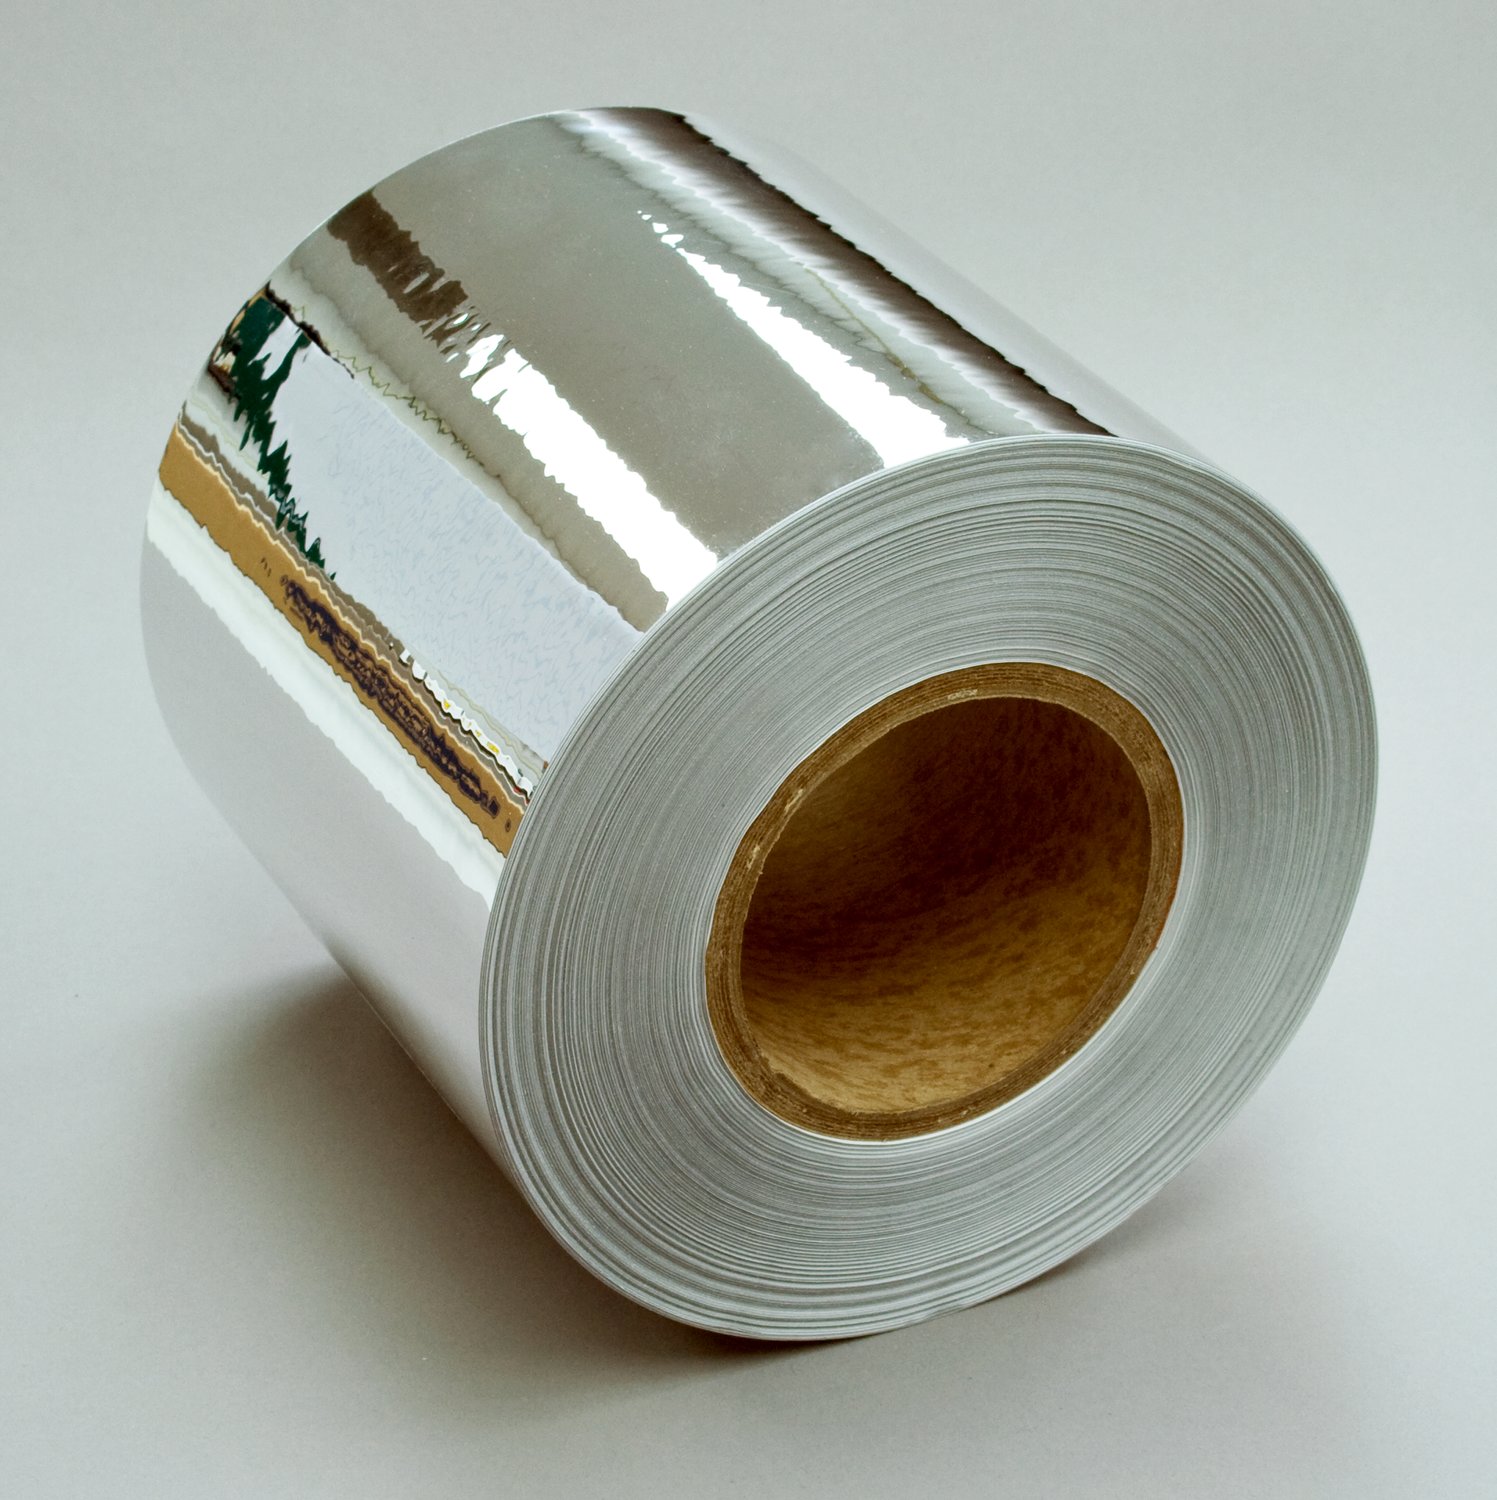 7100073025 - 3M Sheet and Screen Label Material 9017FL, Bright Silver Polyester,
Roll, Config